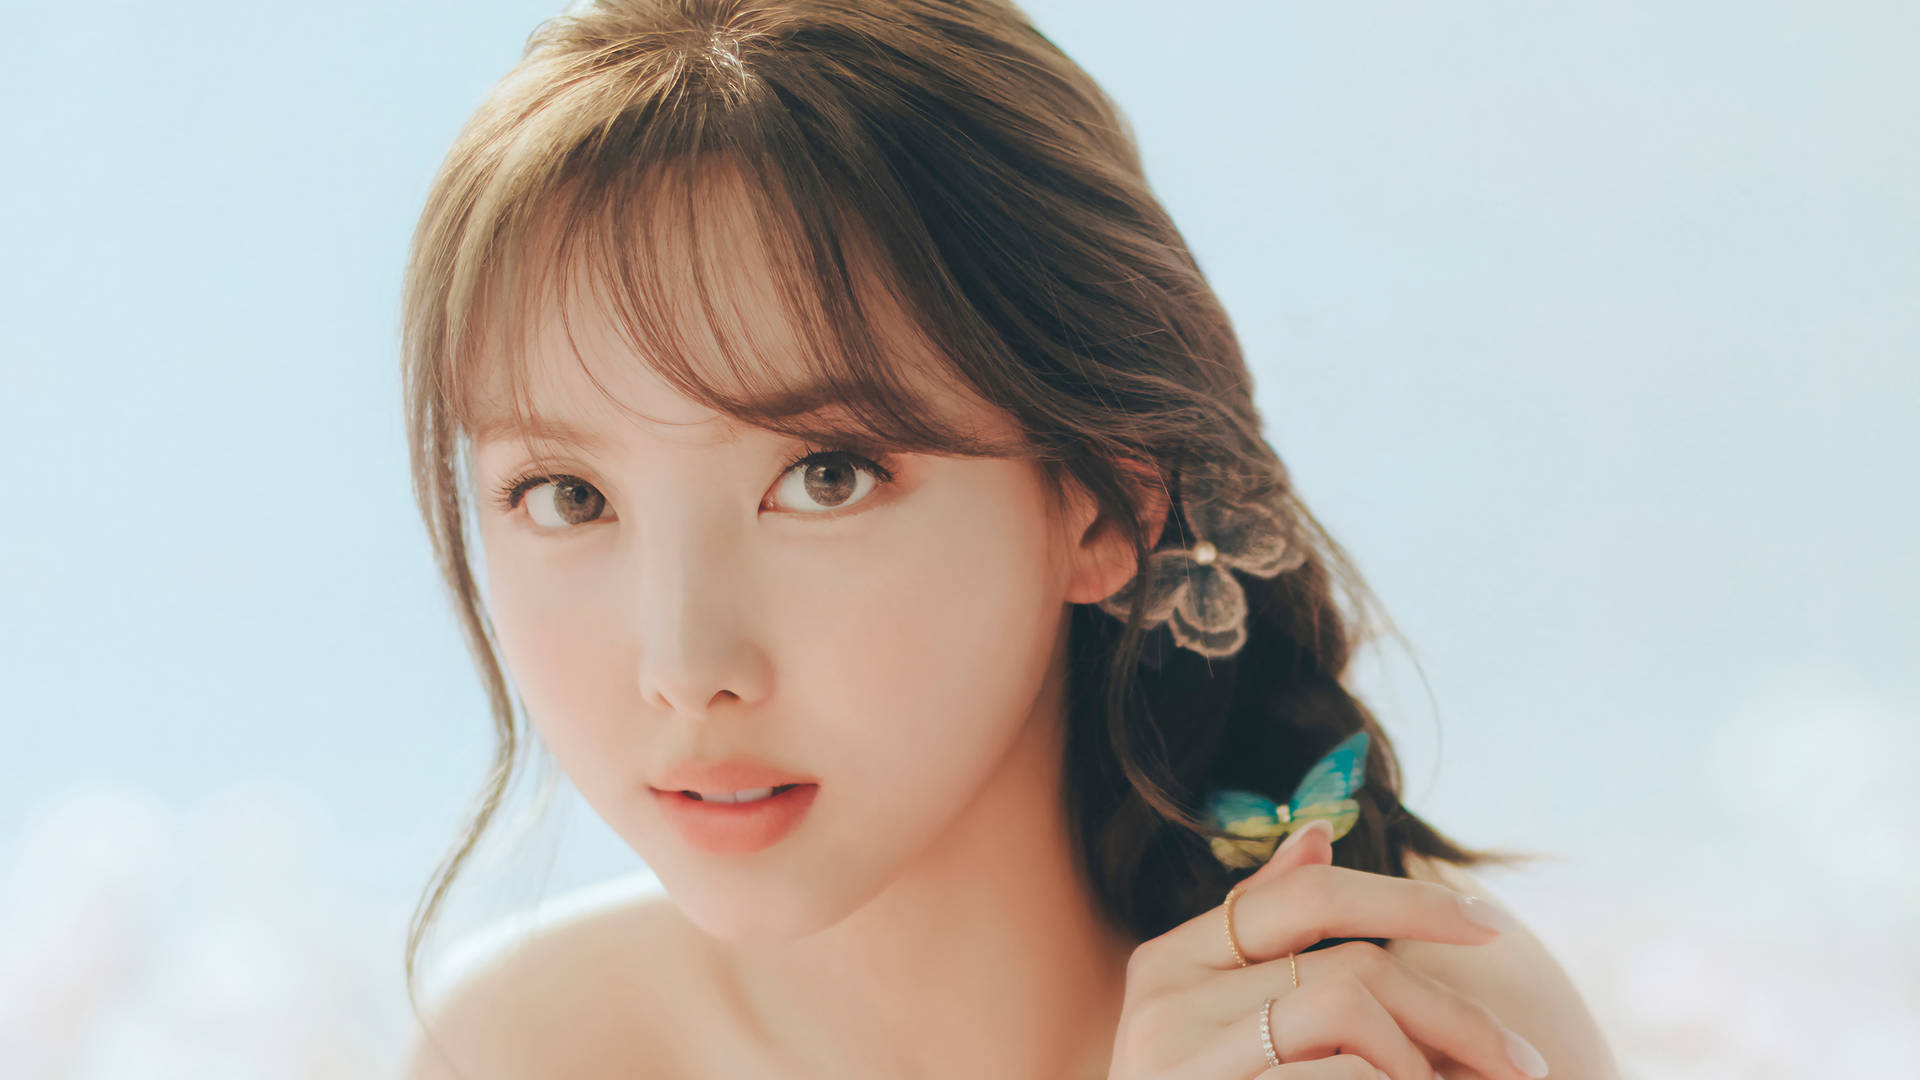 Twice Nayeon With Butterfly Hair Clips Wallpaper